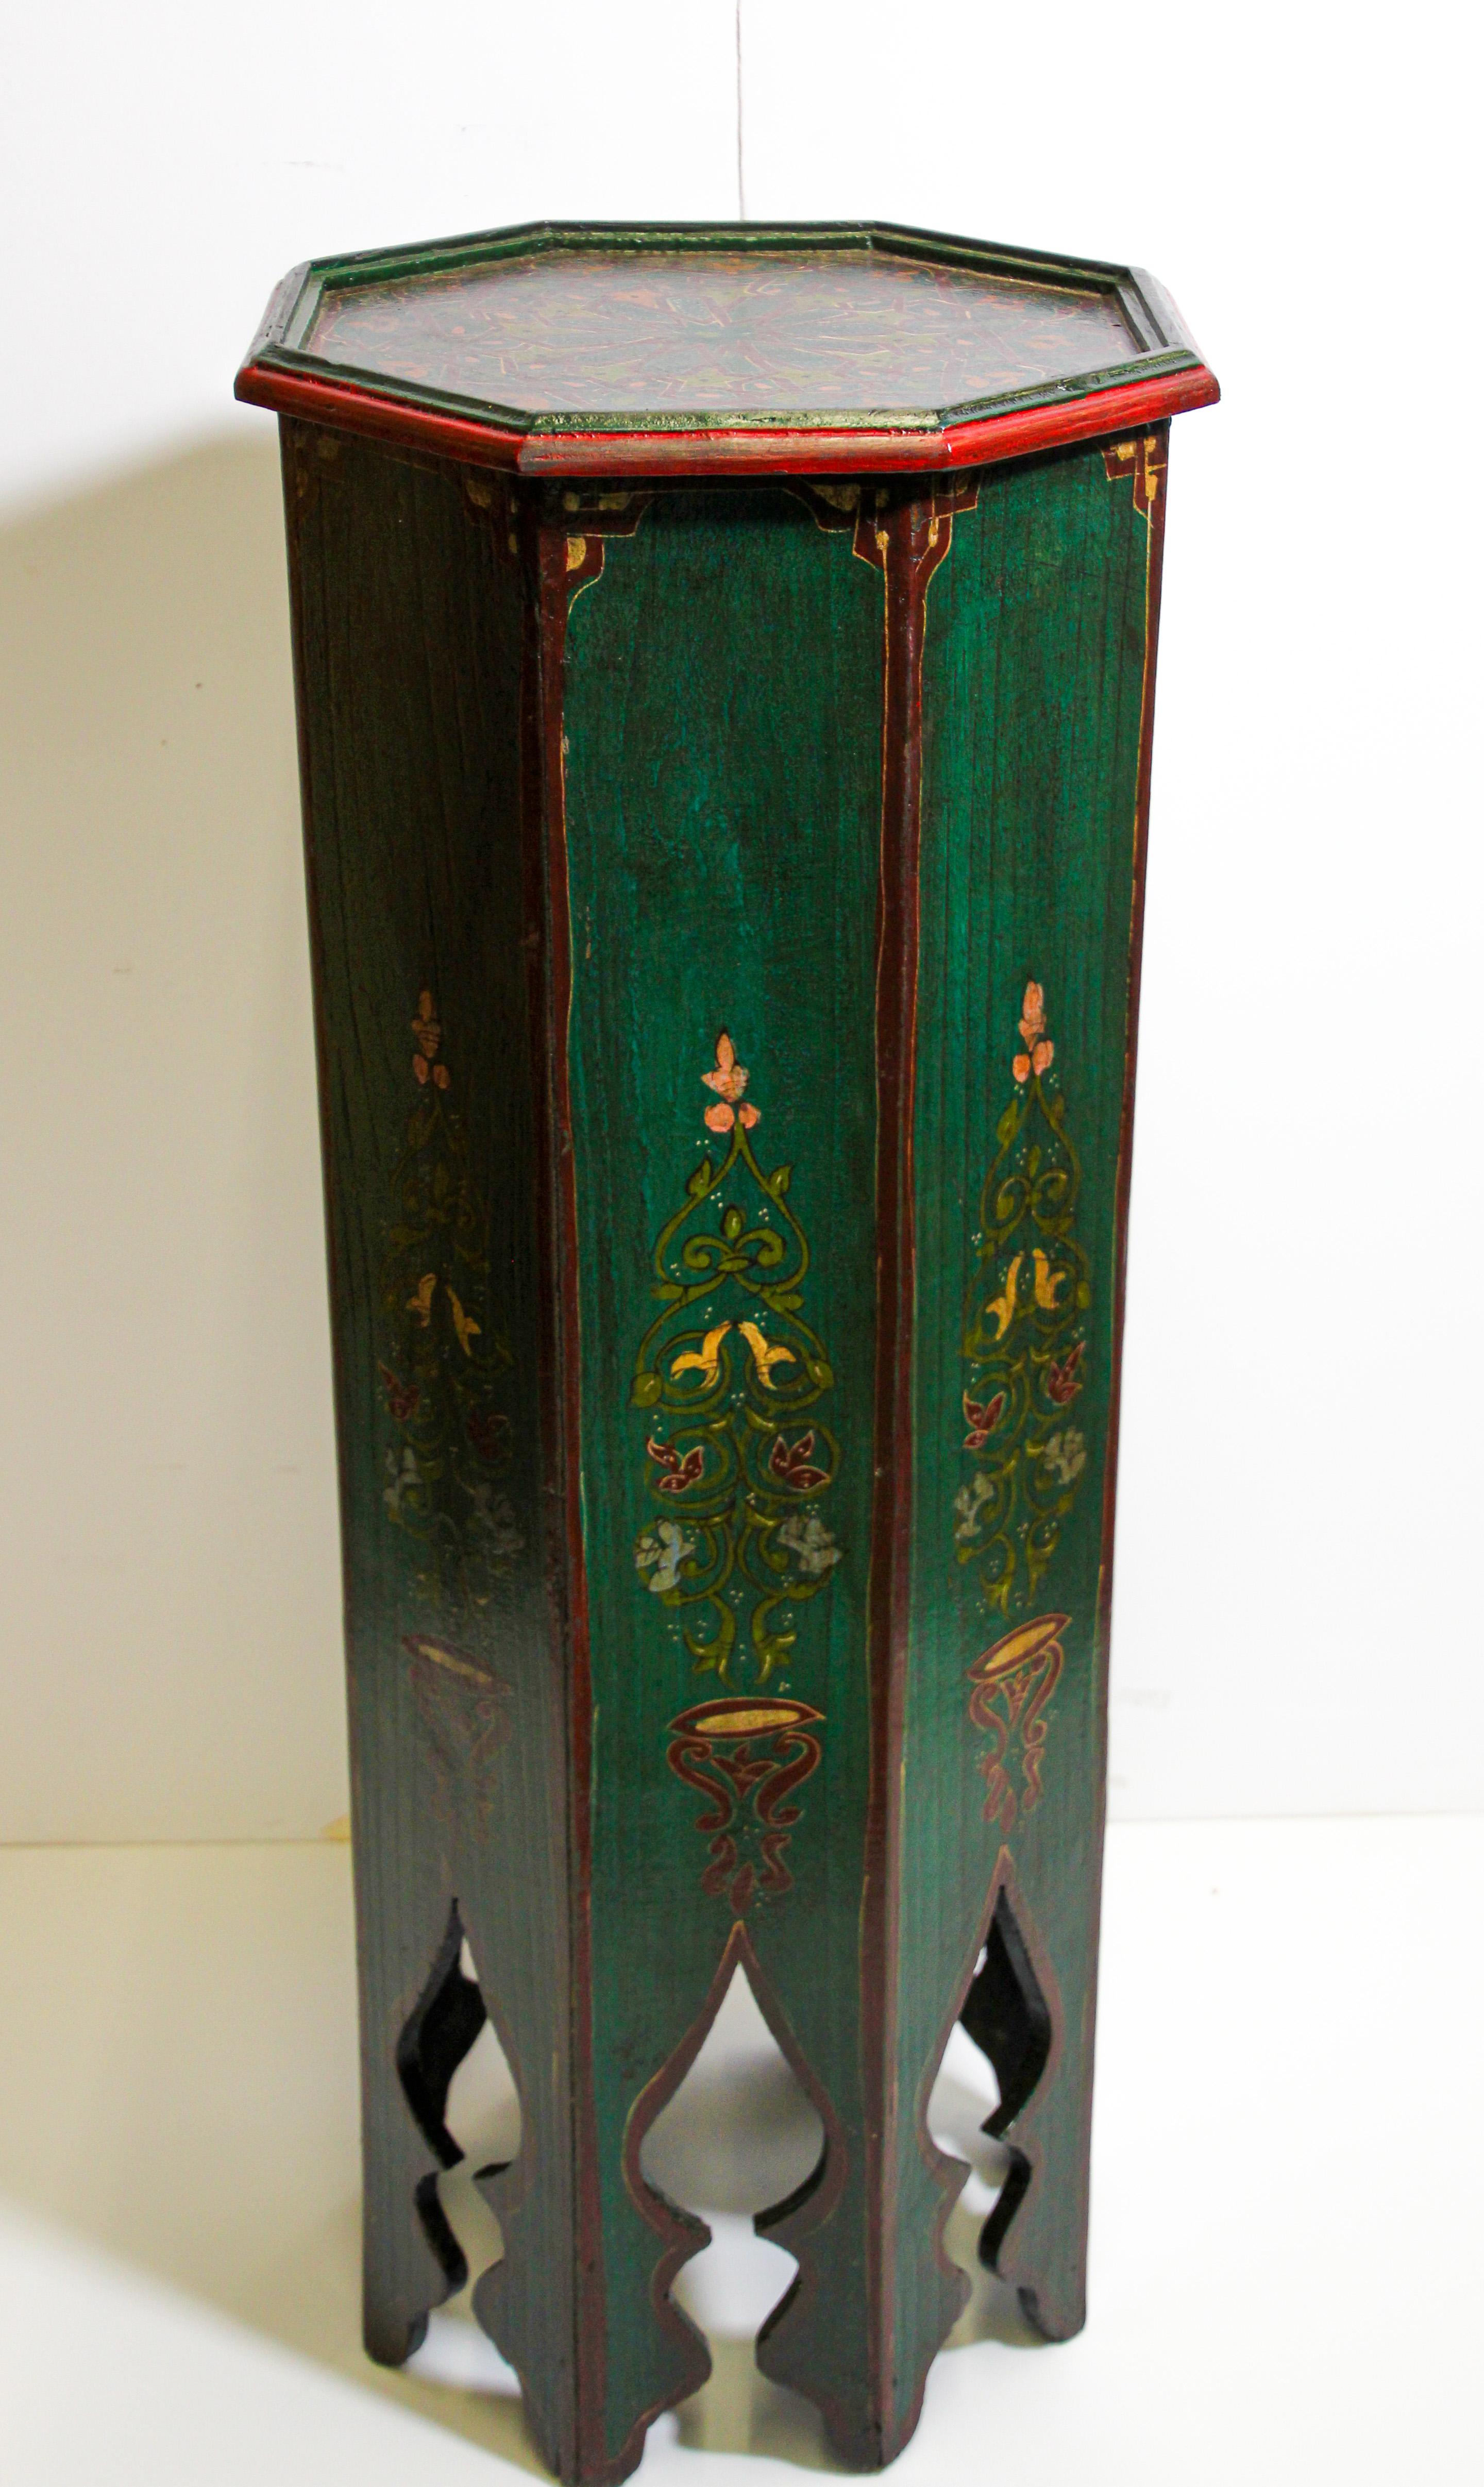 Moroccan vintage pedestal table, hand painted on a dark green background color with floral and geometric designs in red and yellow colors.
Moroccan handcrafted green pedestal table with Moorish red designs and cutout arches work on sides.
This